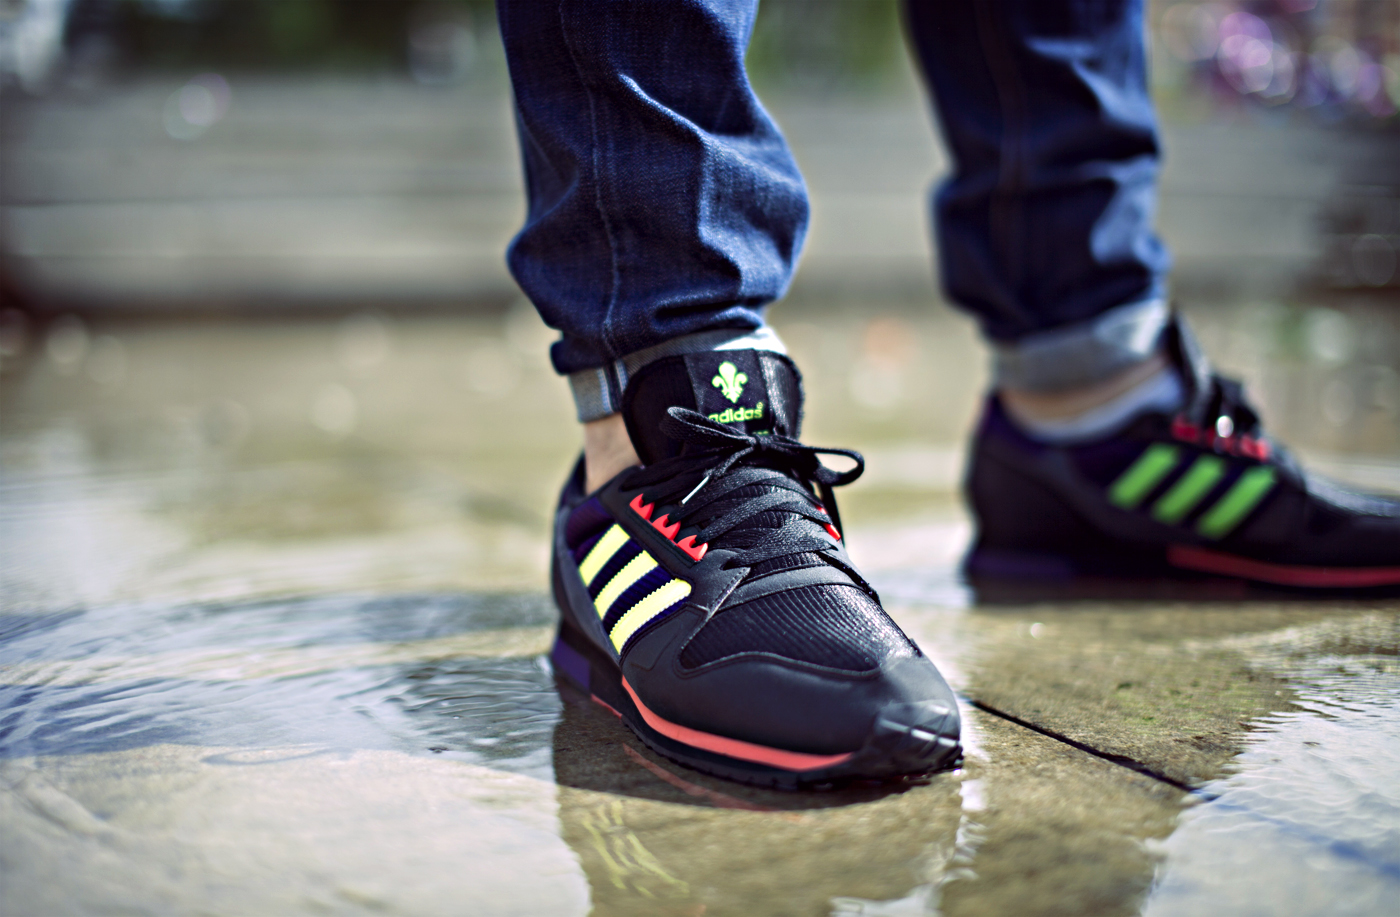 adidas zx 450 limited edition